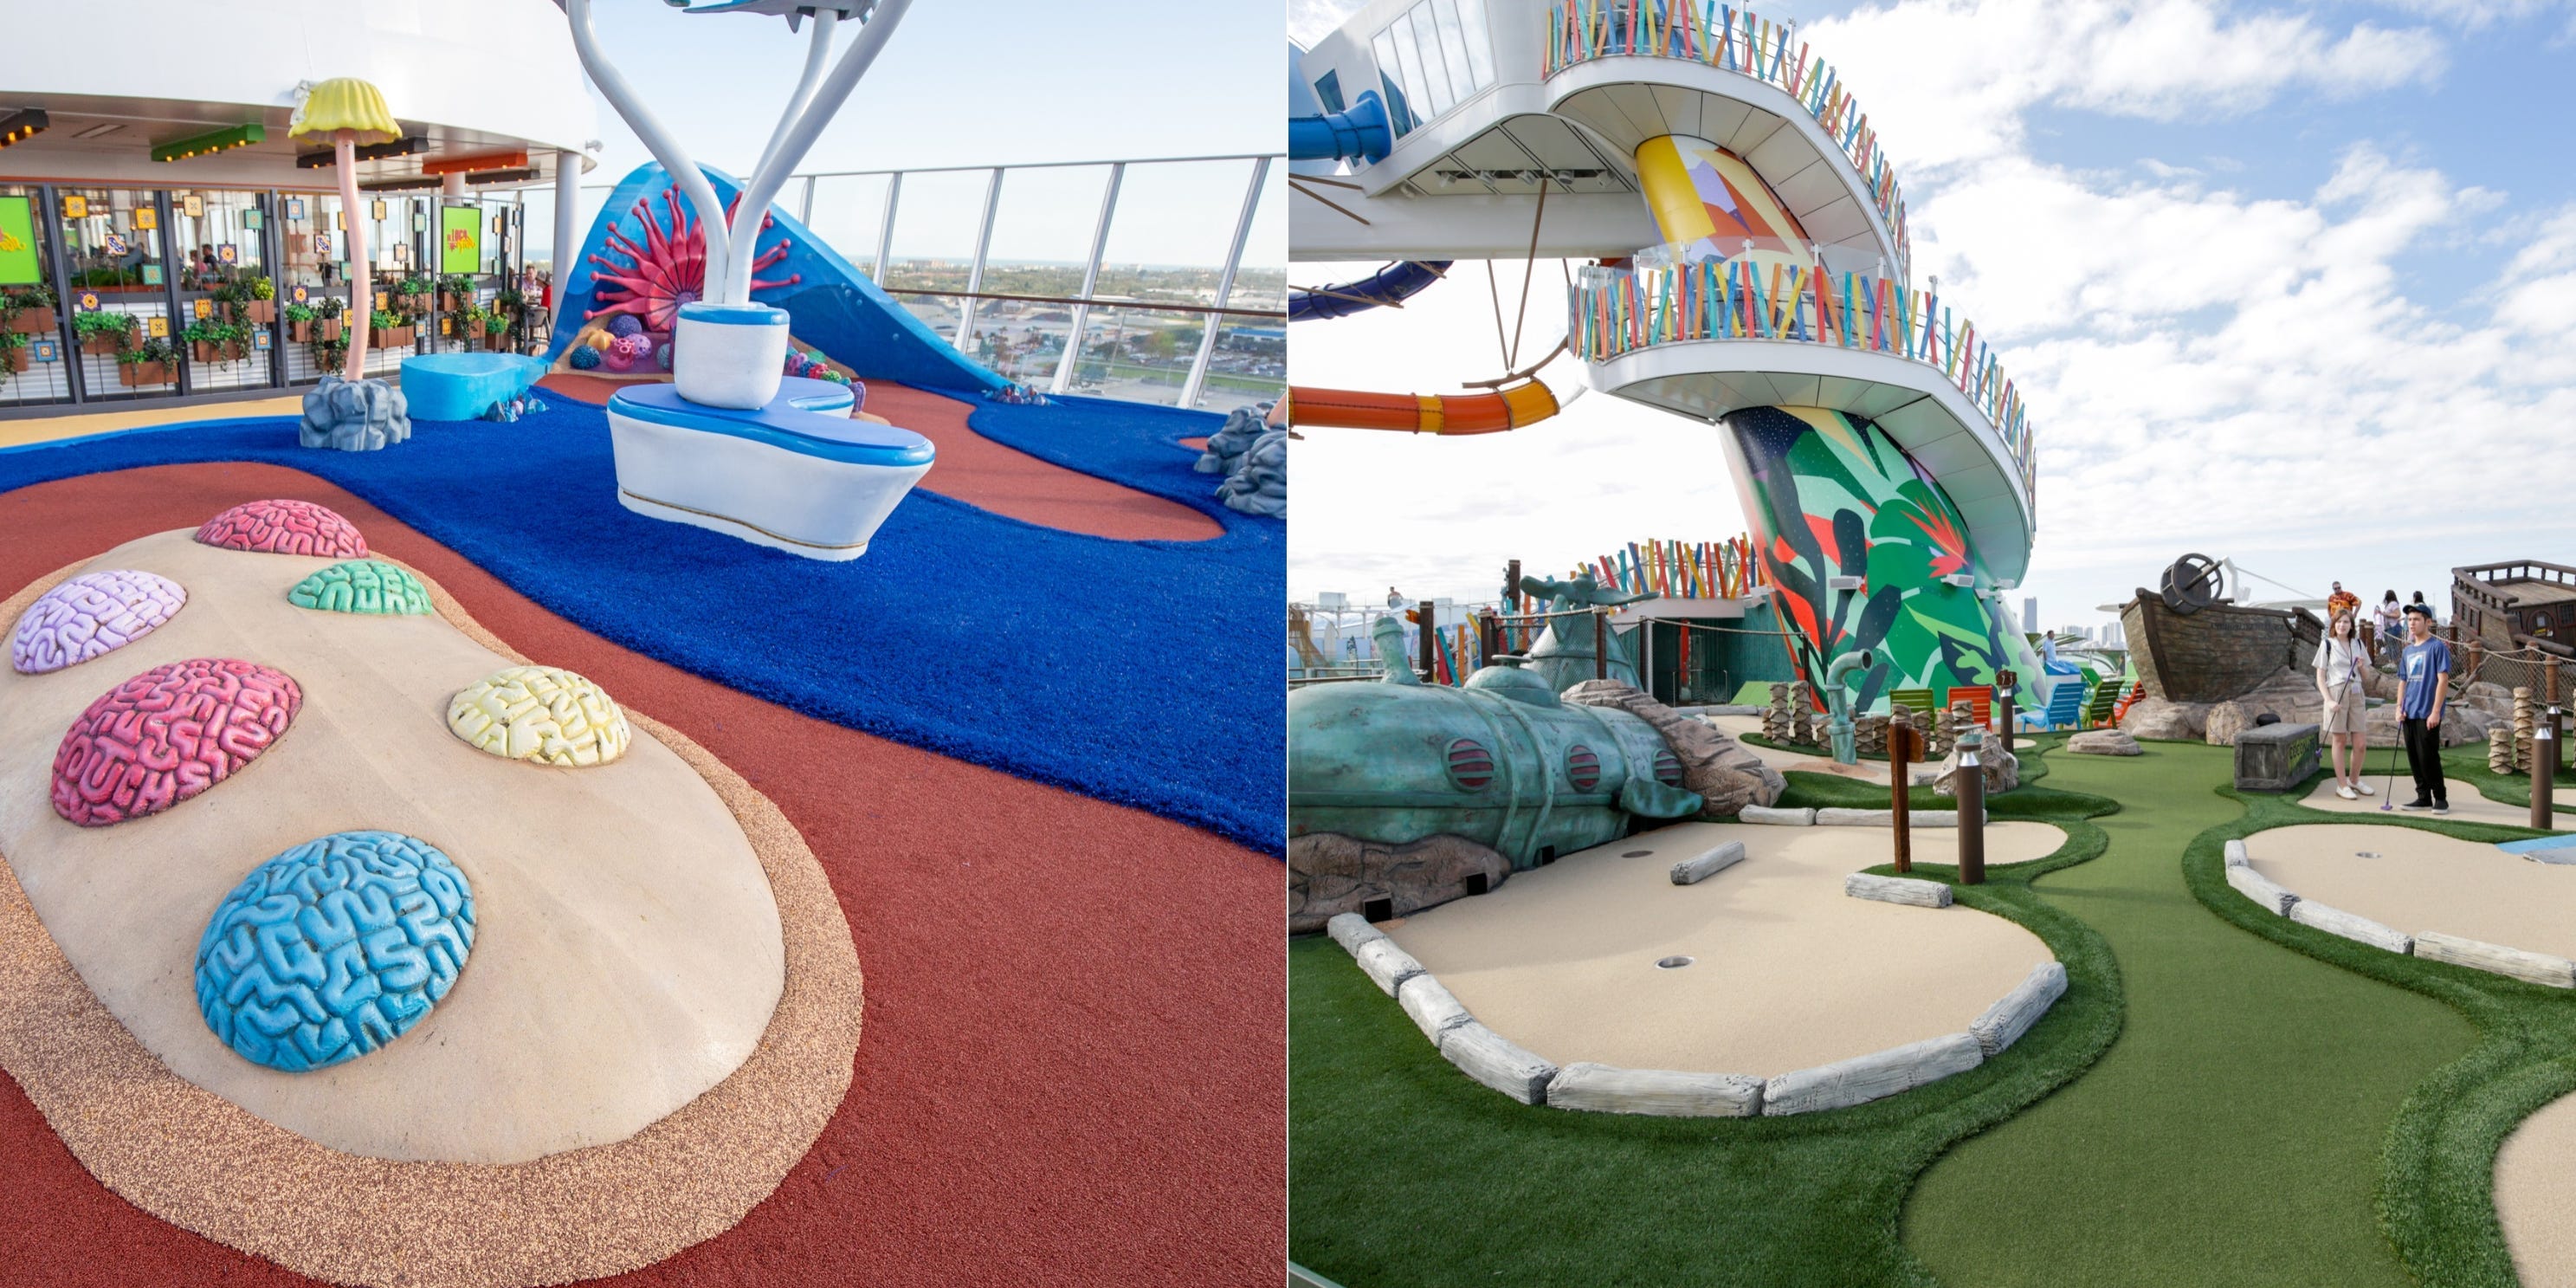 <p>Some of <a href="https://www.businessinsider.com/royal-caribbean-wonder-of-the-sea-2020-9">Wonder of the Seas' enticing outdoor amenities</a> — like the surf simulator, zipline, and mini-golf course — are clustered on the deck above and away from the pools and water slides.</p><p>This layout might be difficult for parents with children who bounce from one activity to the next. Wouldn't it be easier to have all of these outdoor extras near each other, or at least on the same deck, for parental supervision purposes?</p>